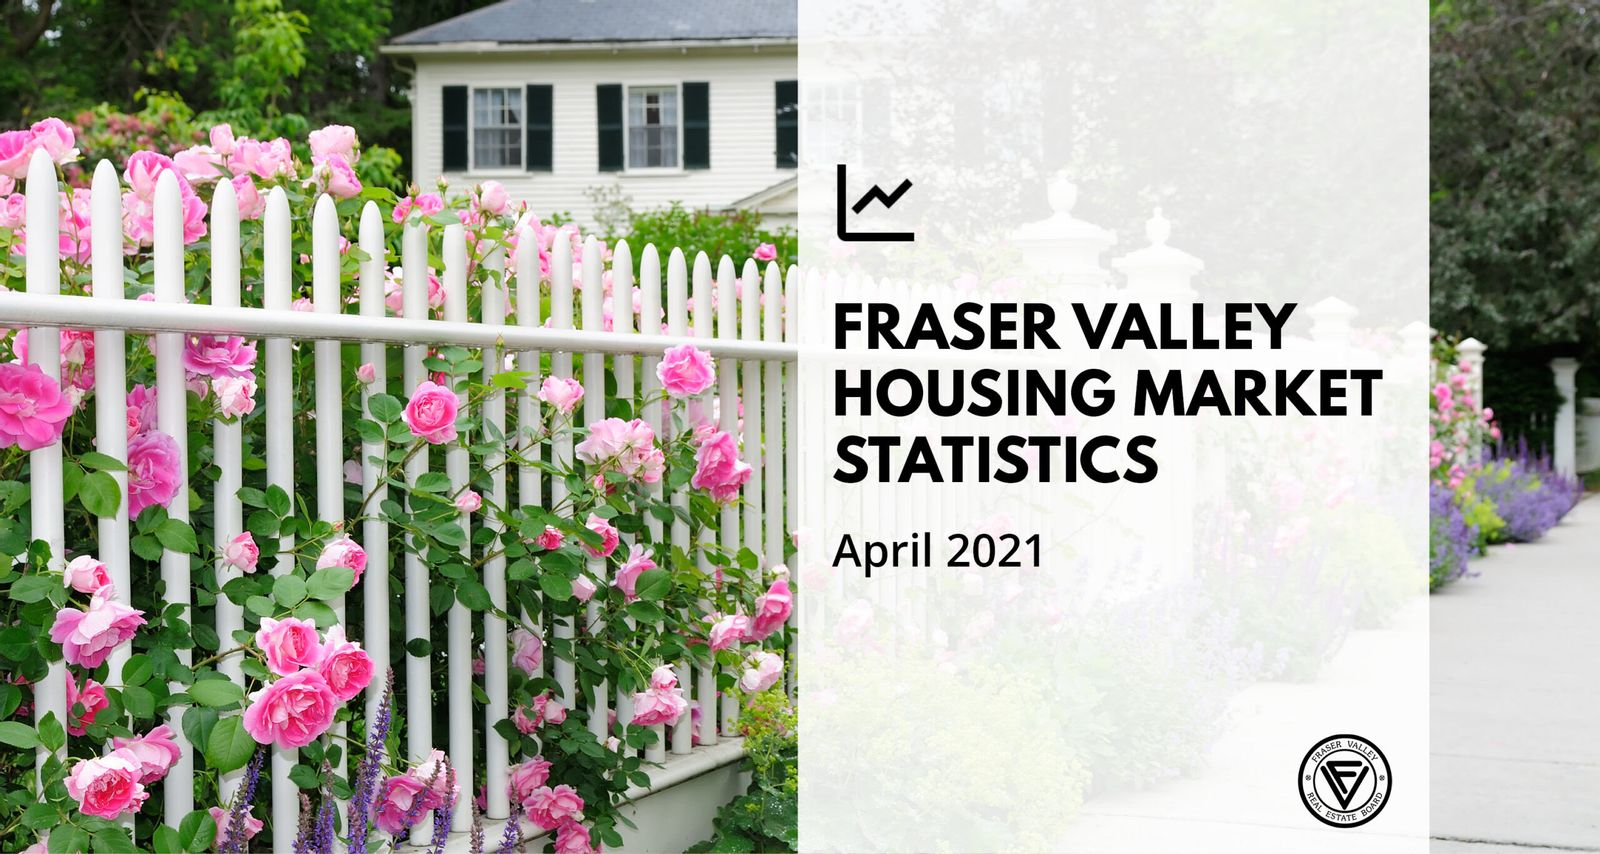 Monthly sales and new listings in the Fraser Valley continue blistering pace; surge in inventory starting to calm prices